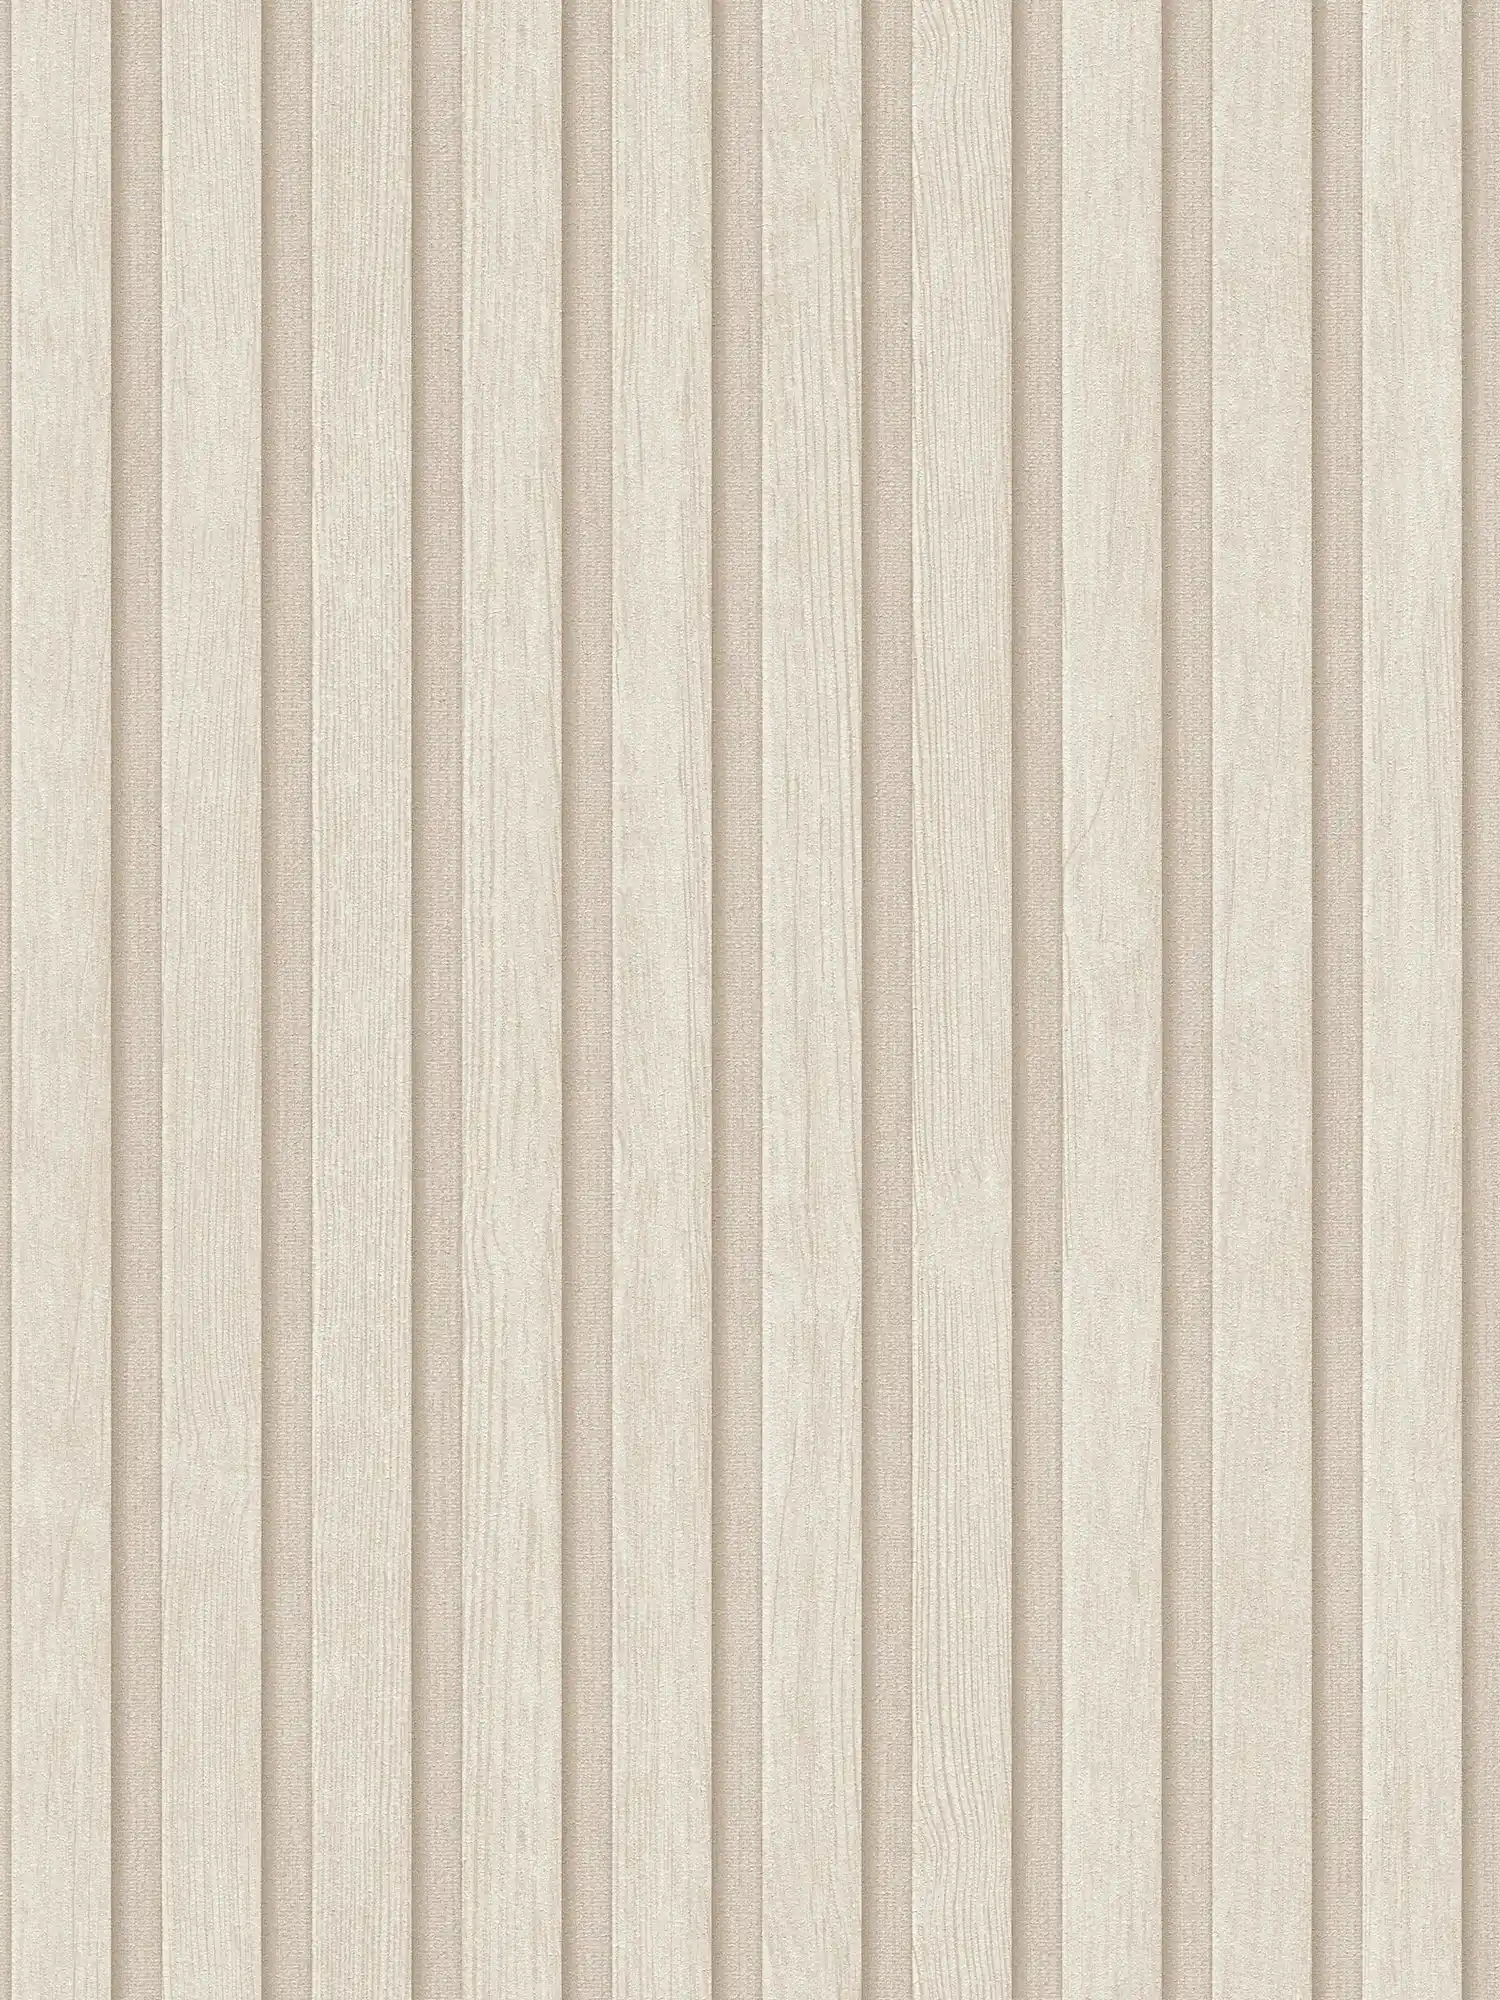         Non-woven wallpaper with wood effect acoustic panel look - cream, beige
    